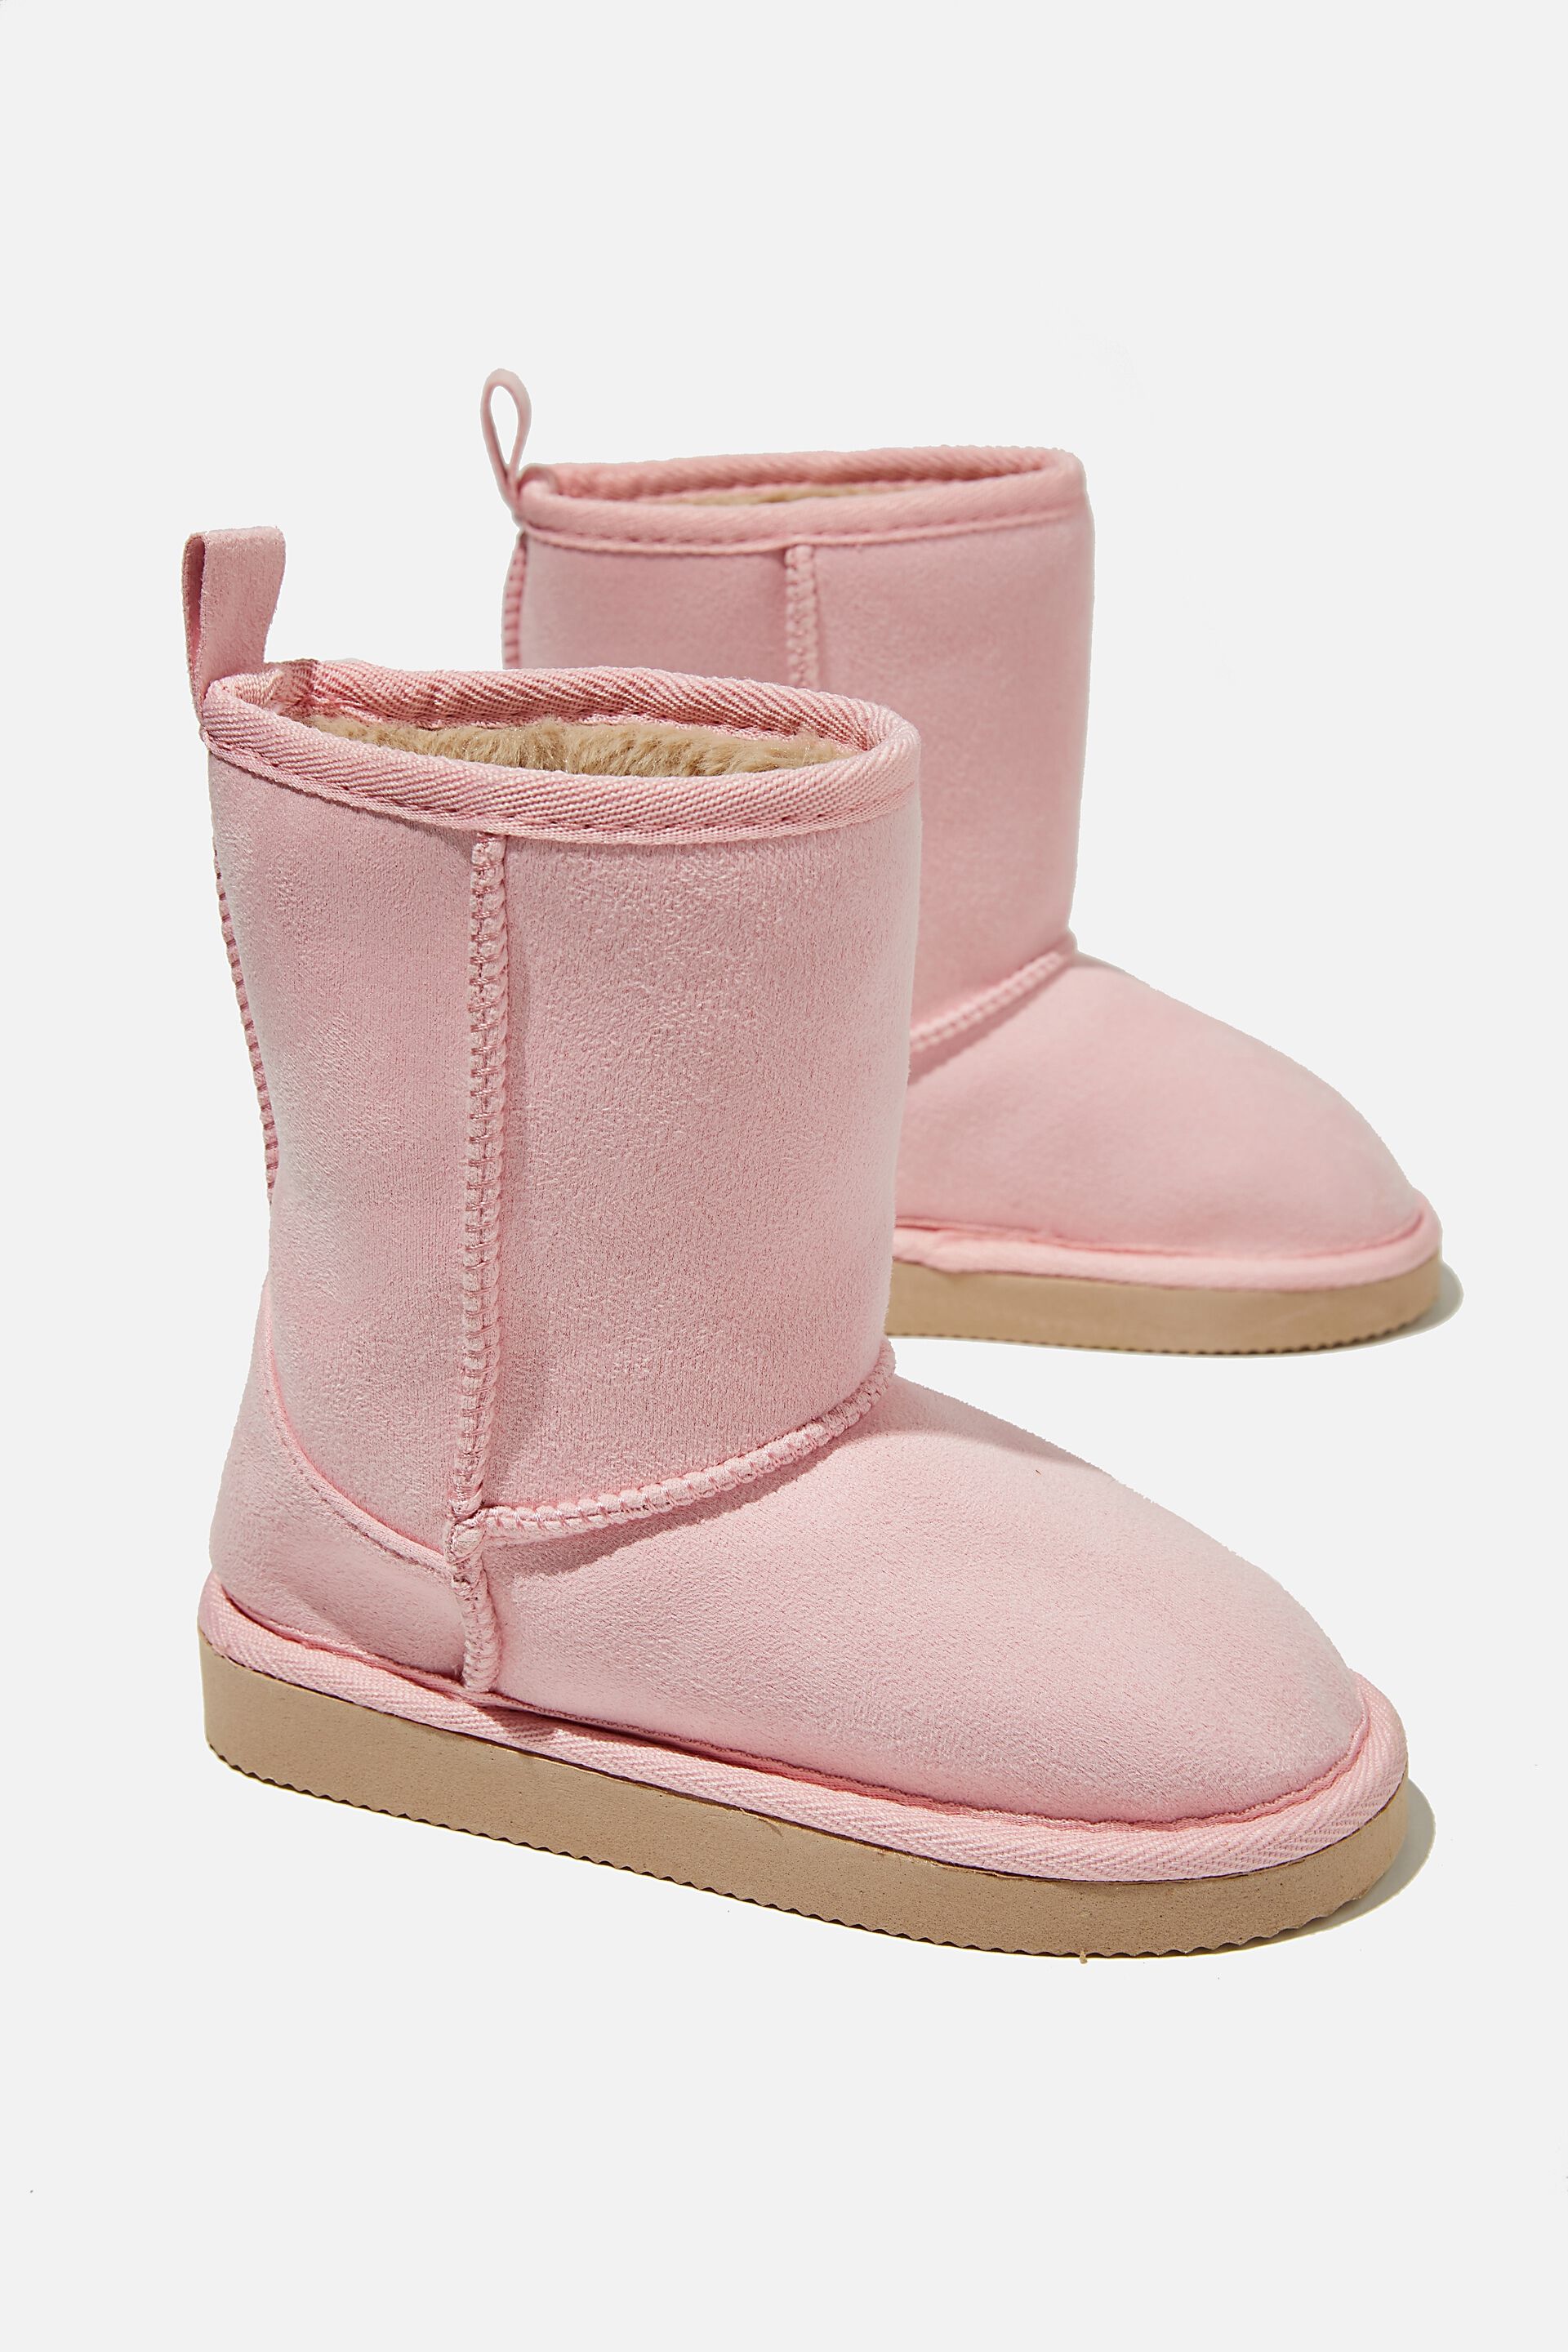 cotton on ugg boots